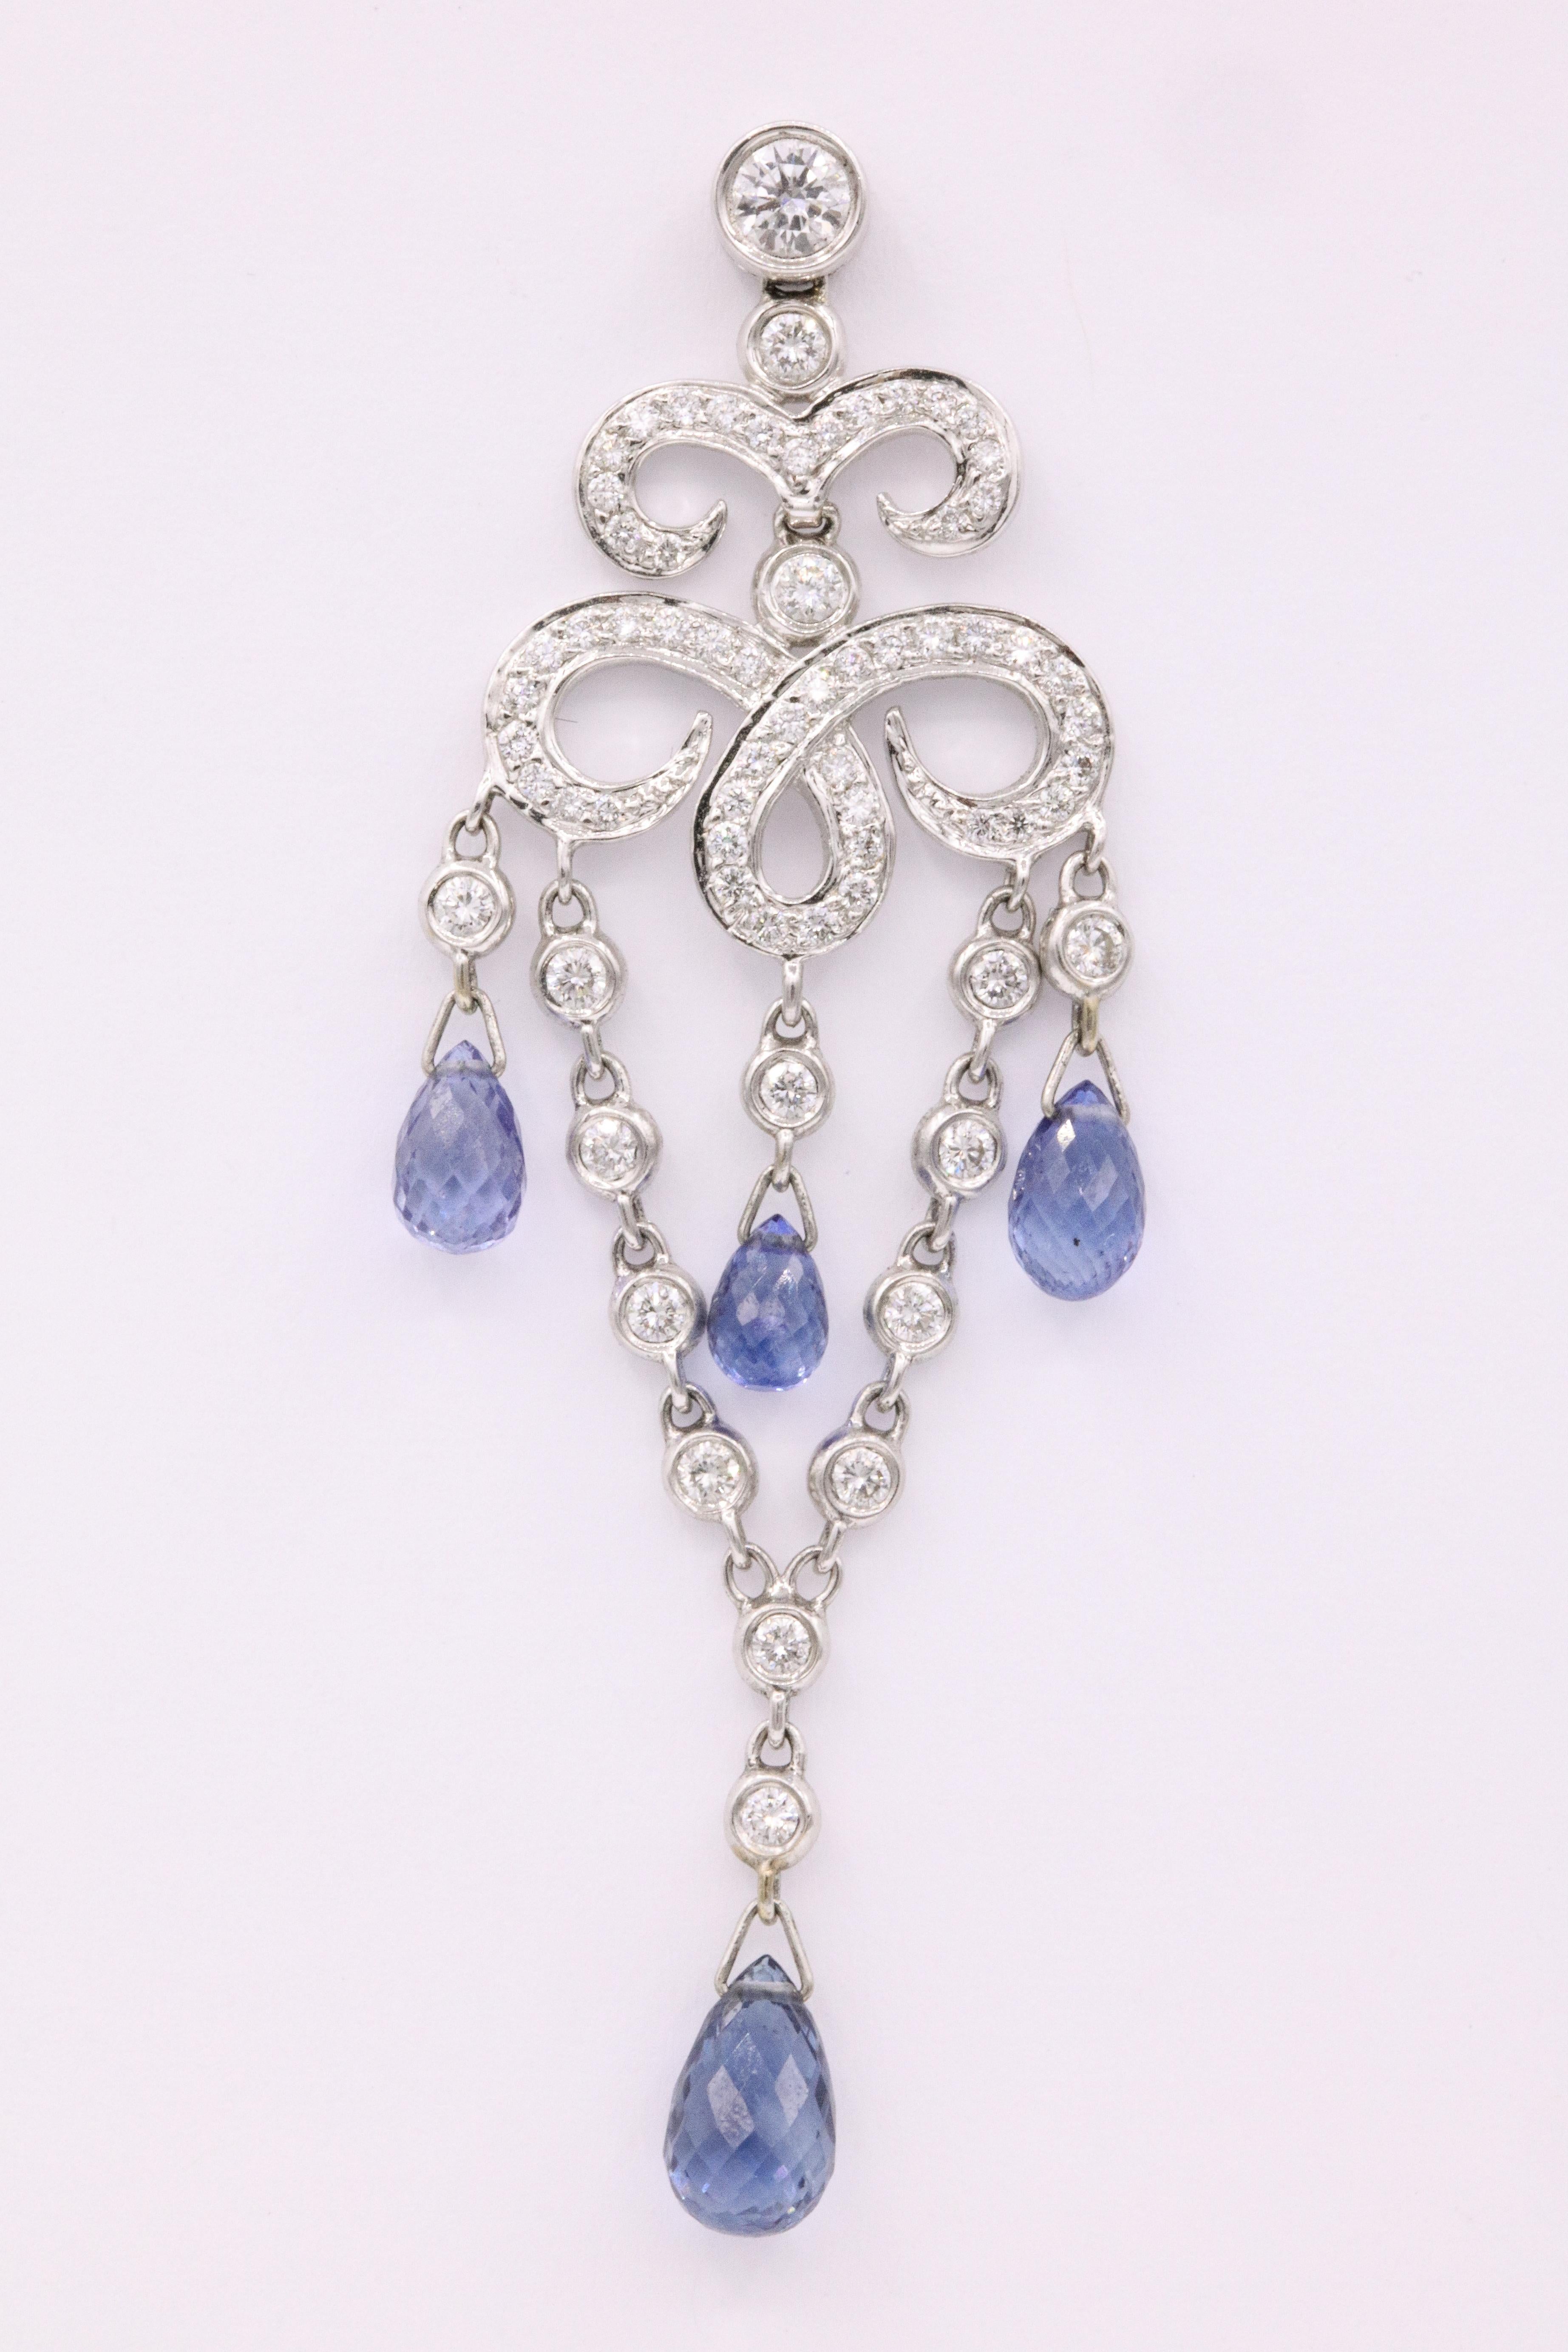 18K White gold drop earrings featuring 134 round brilliants weighing 1.28 carats and 8 blue sapphires weighing 6.43 carats.
Color G-H
Clarity VS-SI